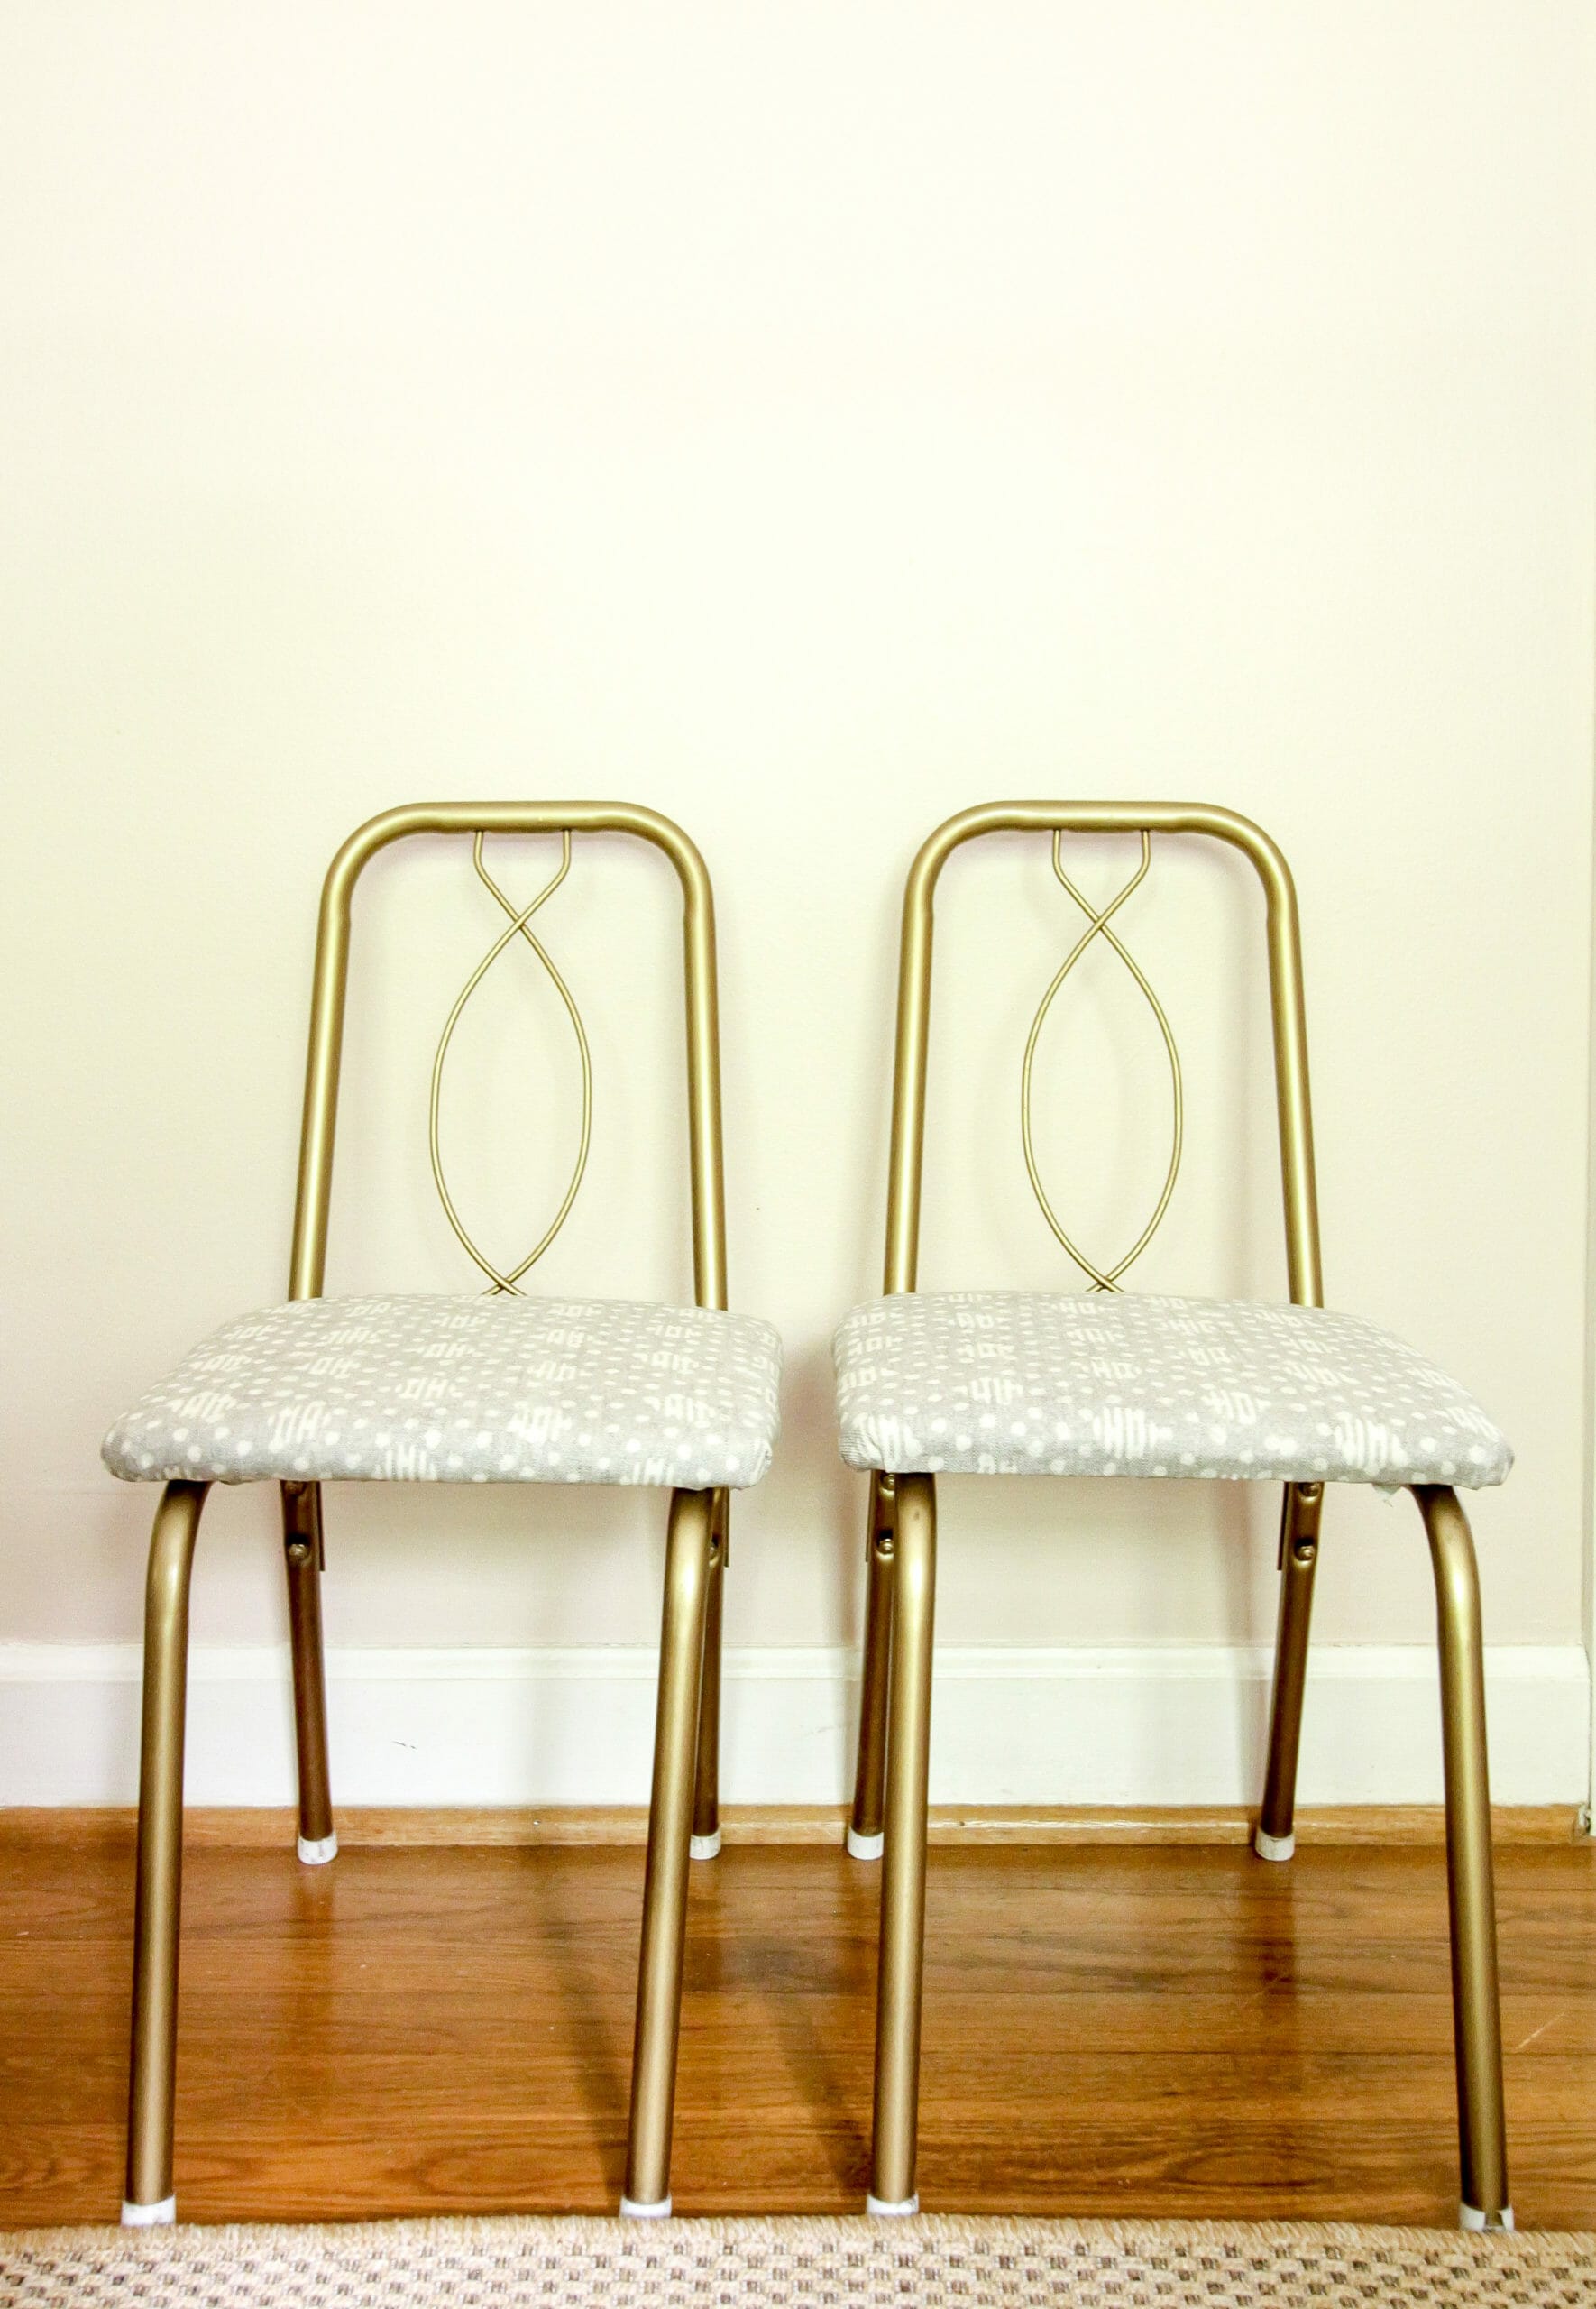 How to paint and upholster metal chairs - Cassie Bustamante